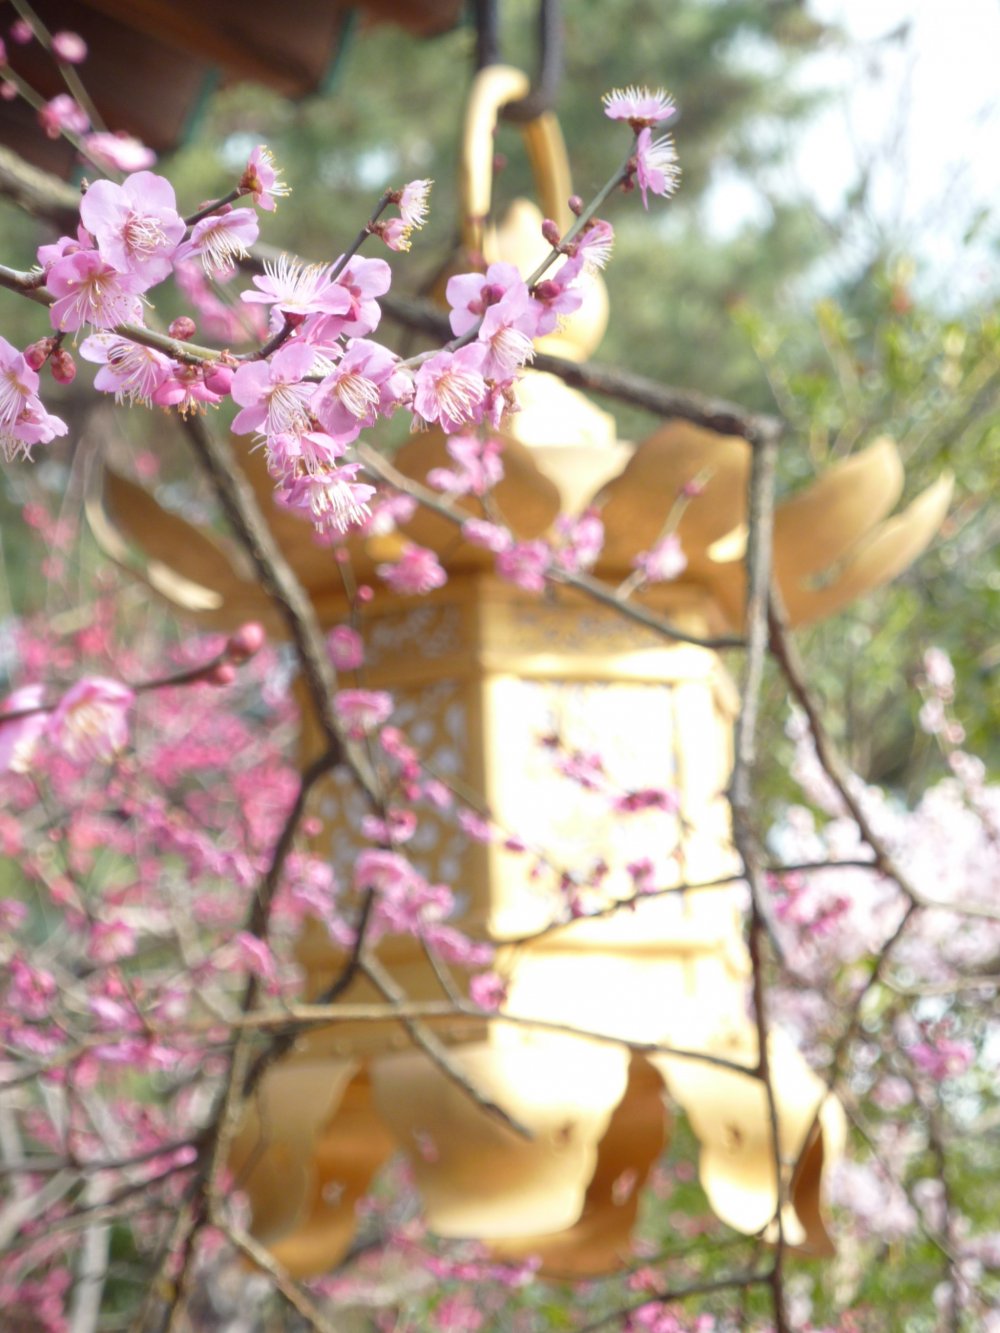 Plum blossoms have been celebrated in Japanese poetry since the 8th century